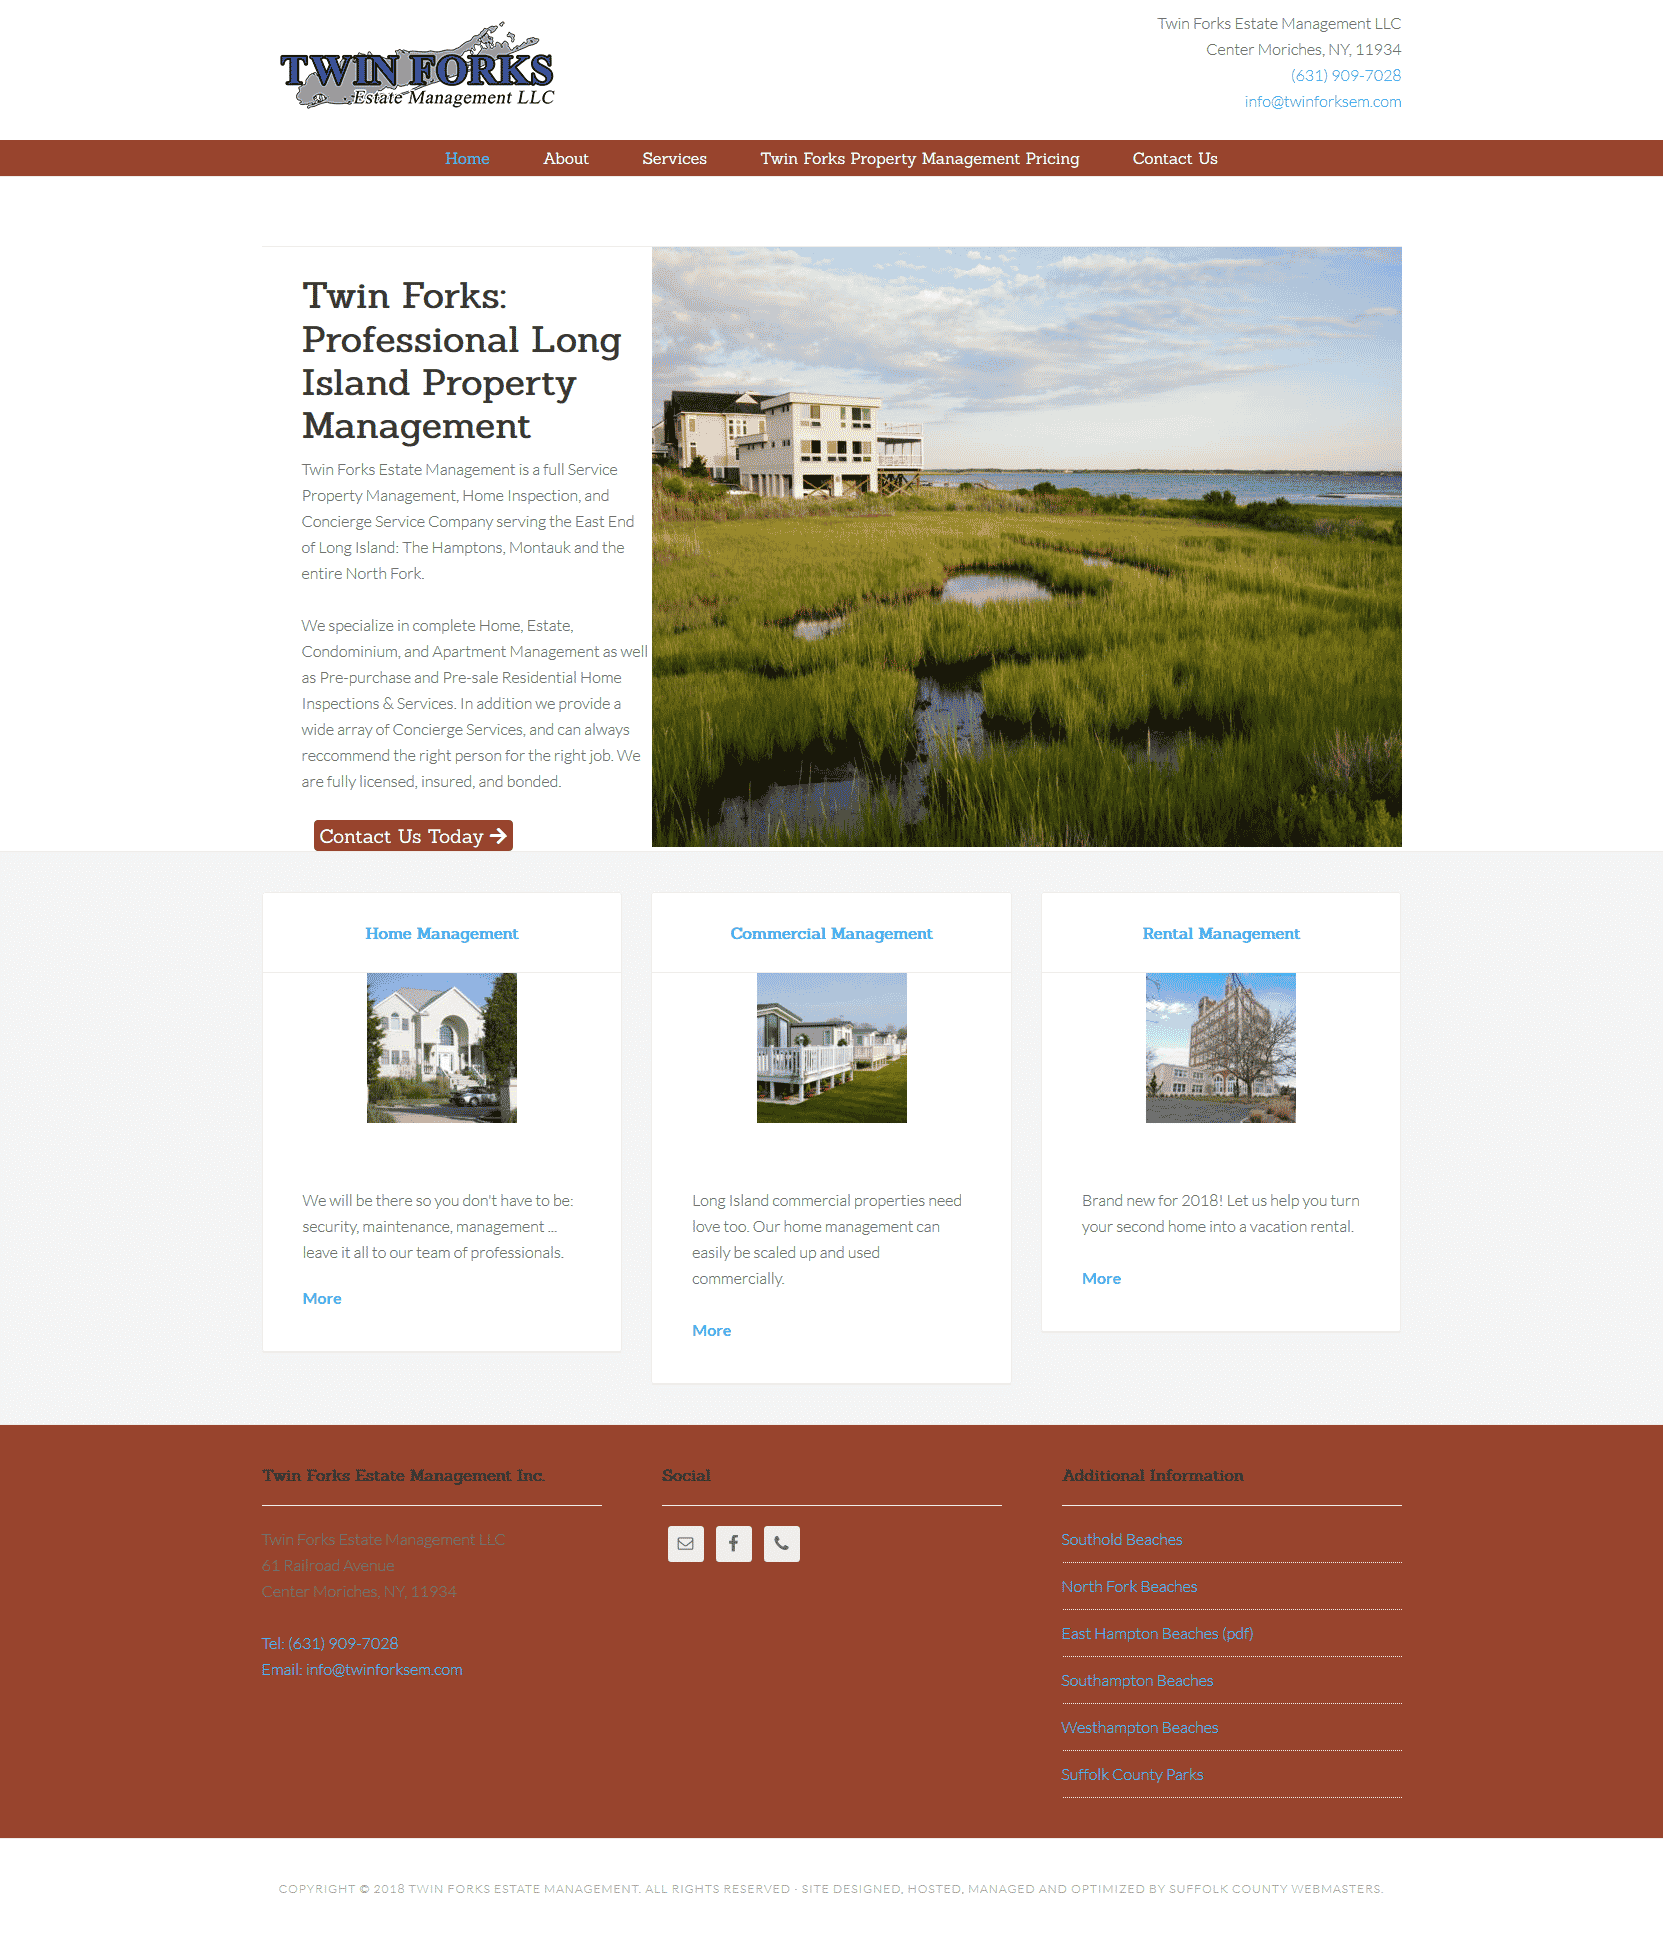 Twin Forks Estate Management website built by Suffolk County Webmasters